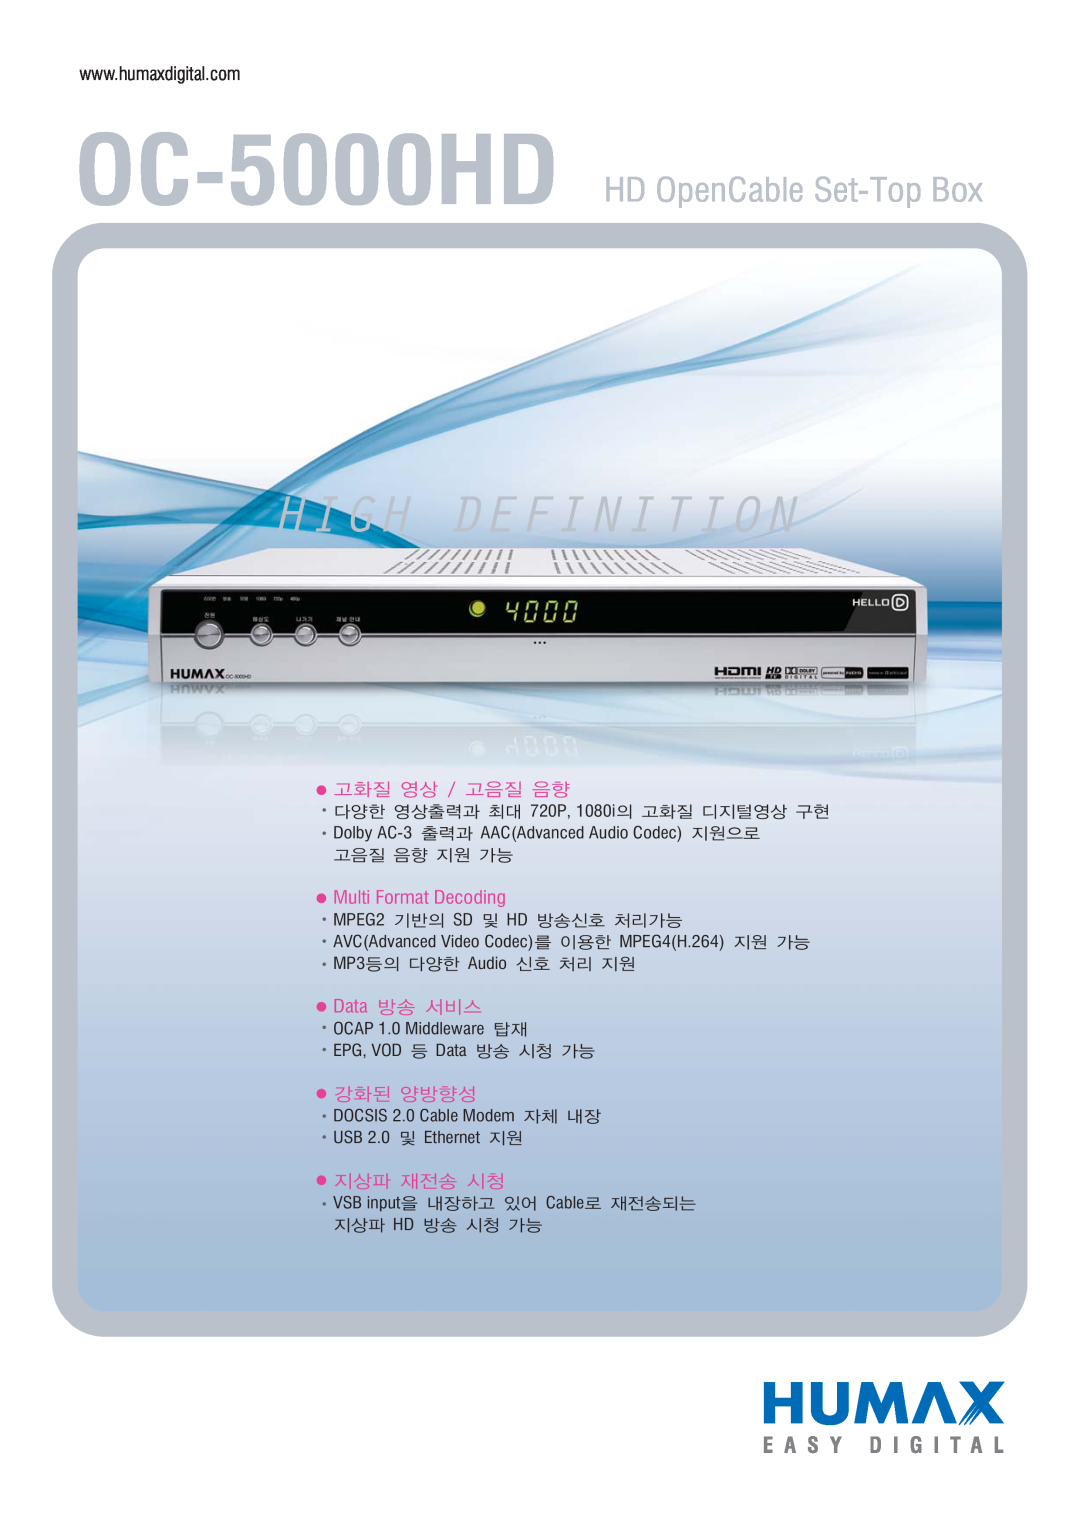 Humax manual High Definition, OC-5000HD HD OpenCable Set-Top Box, Multi Format Decoding, Data 